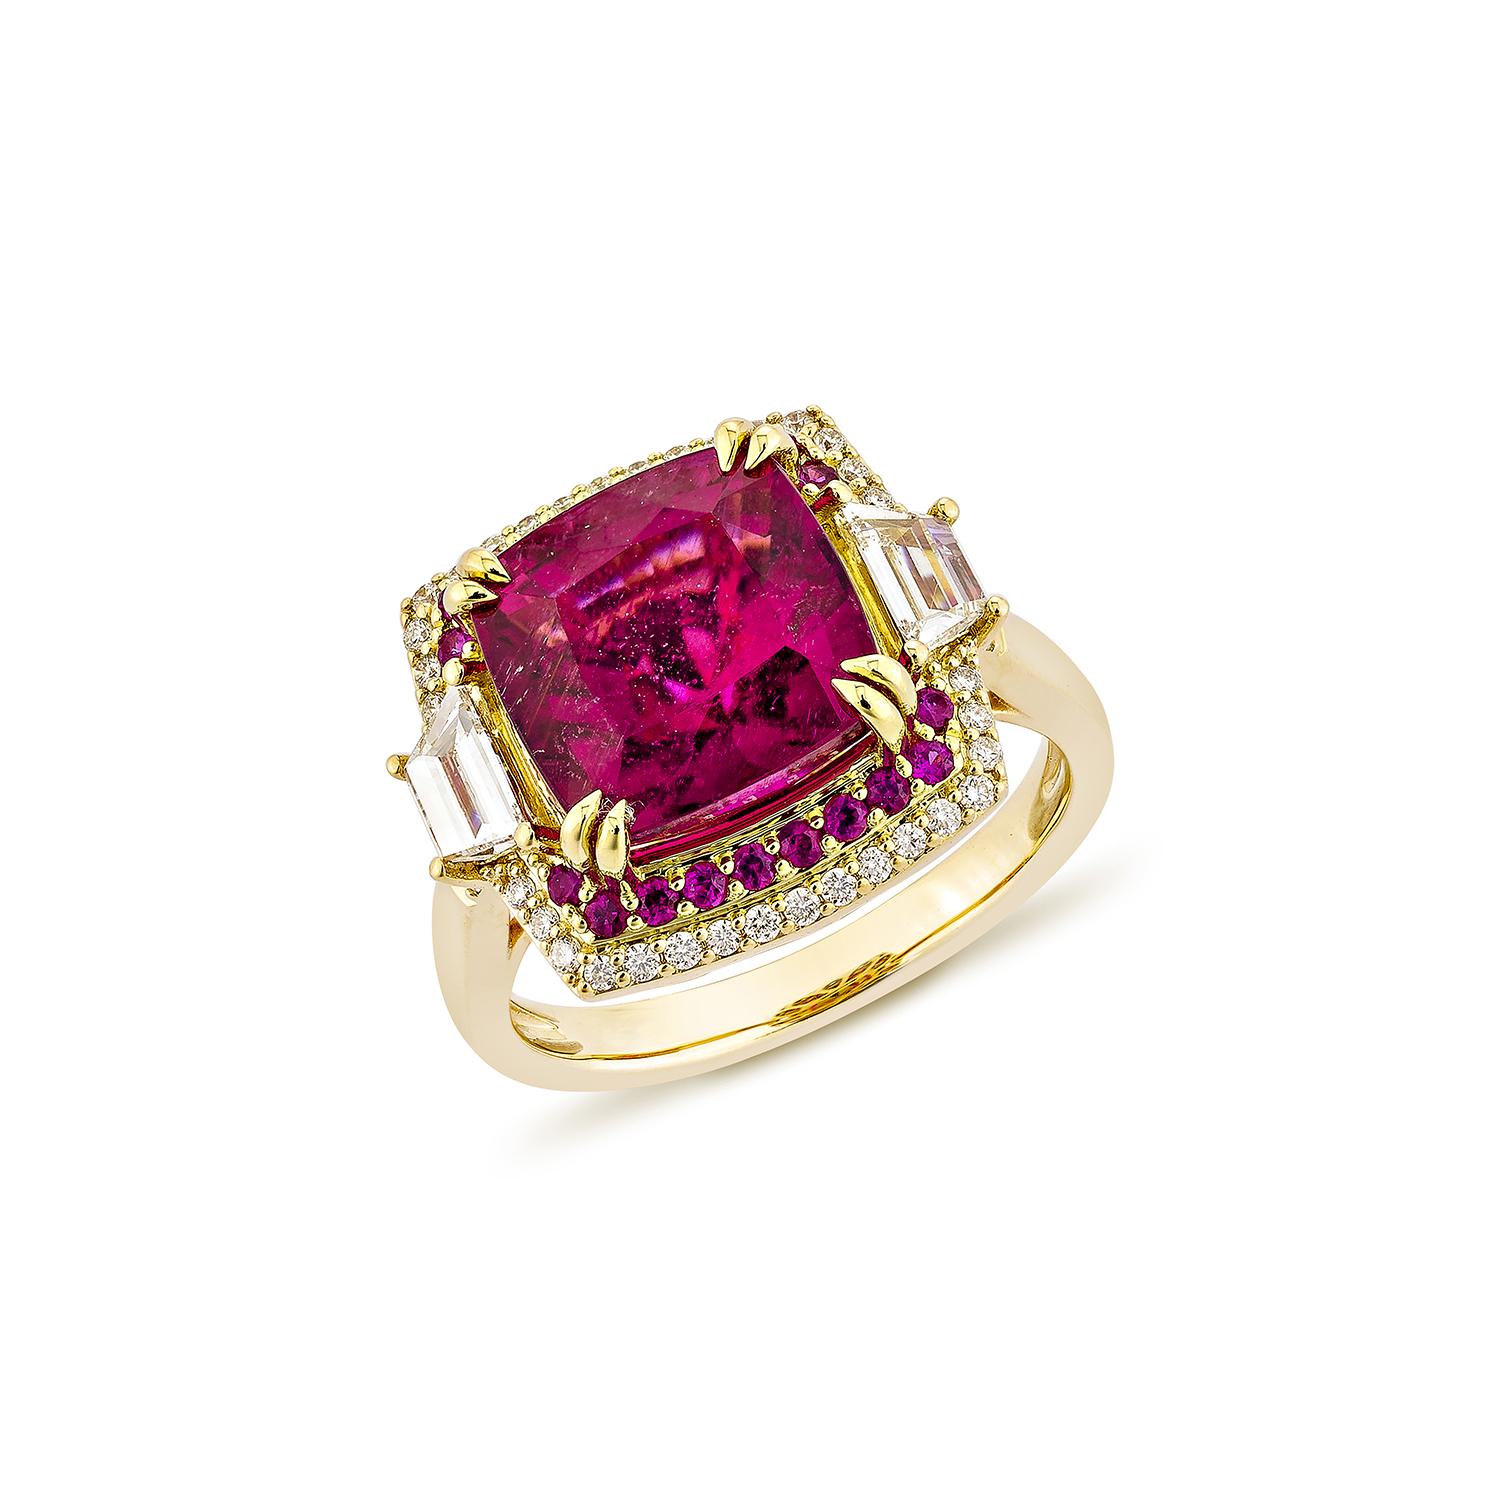 Contemporary 5.73 Carat Rubellite Cocktail Ring in 18Karat Yellow Gold with Ruby and Diamond. For Sale